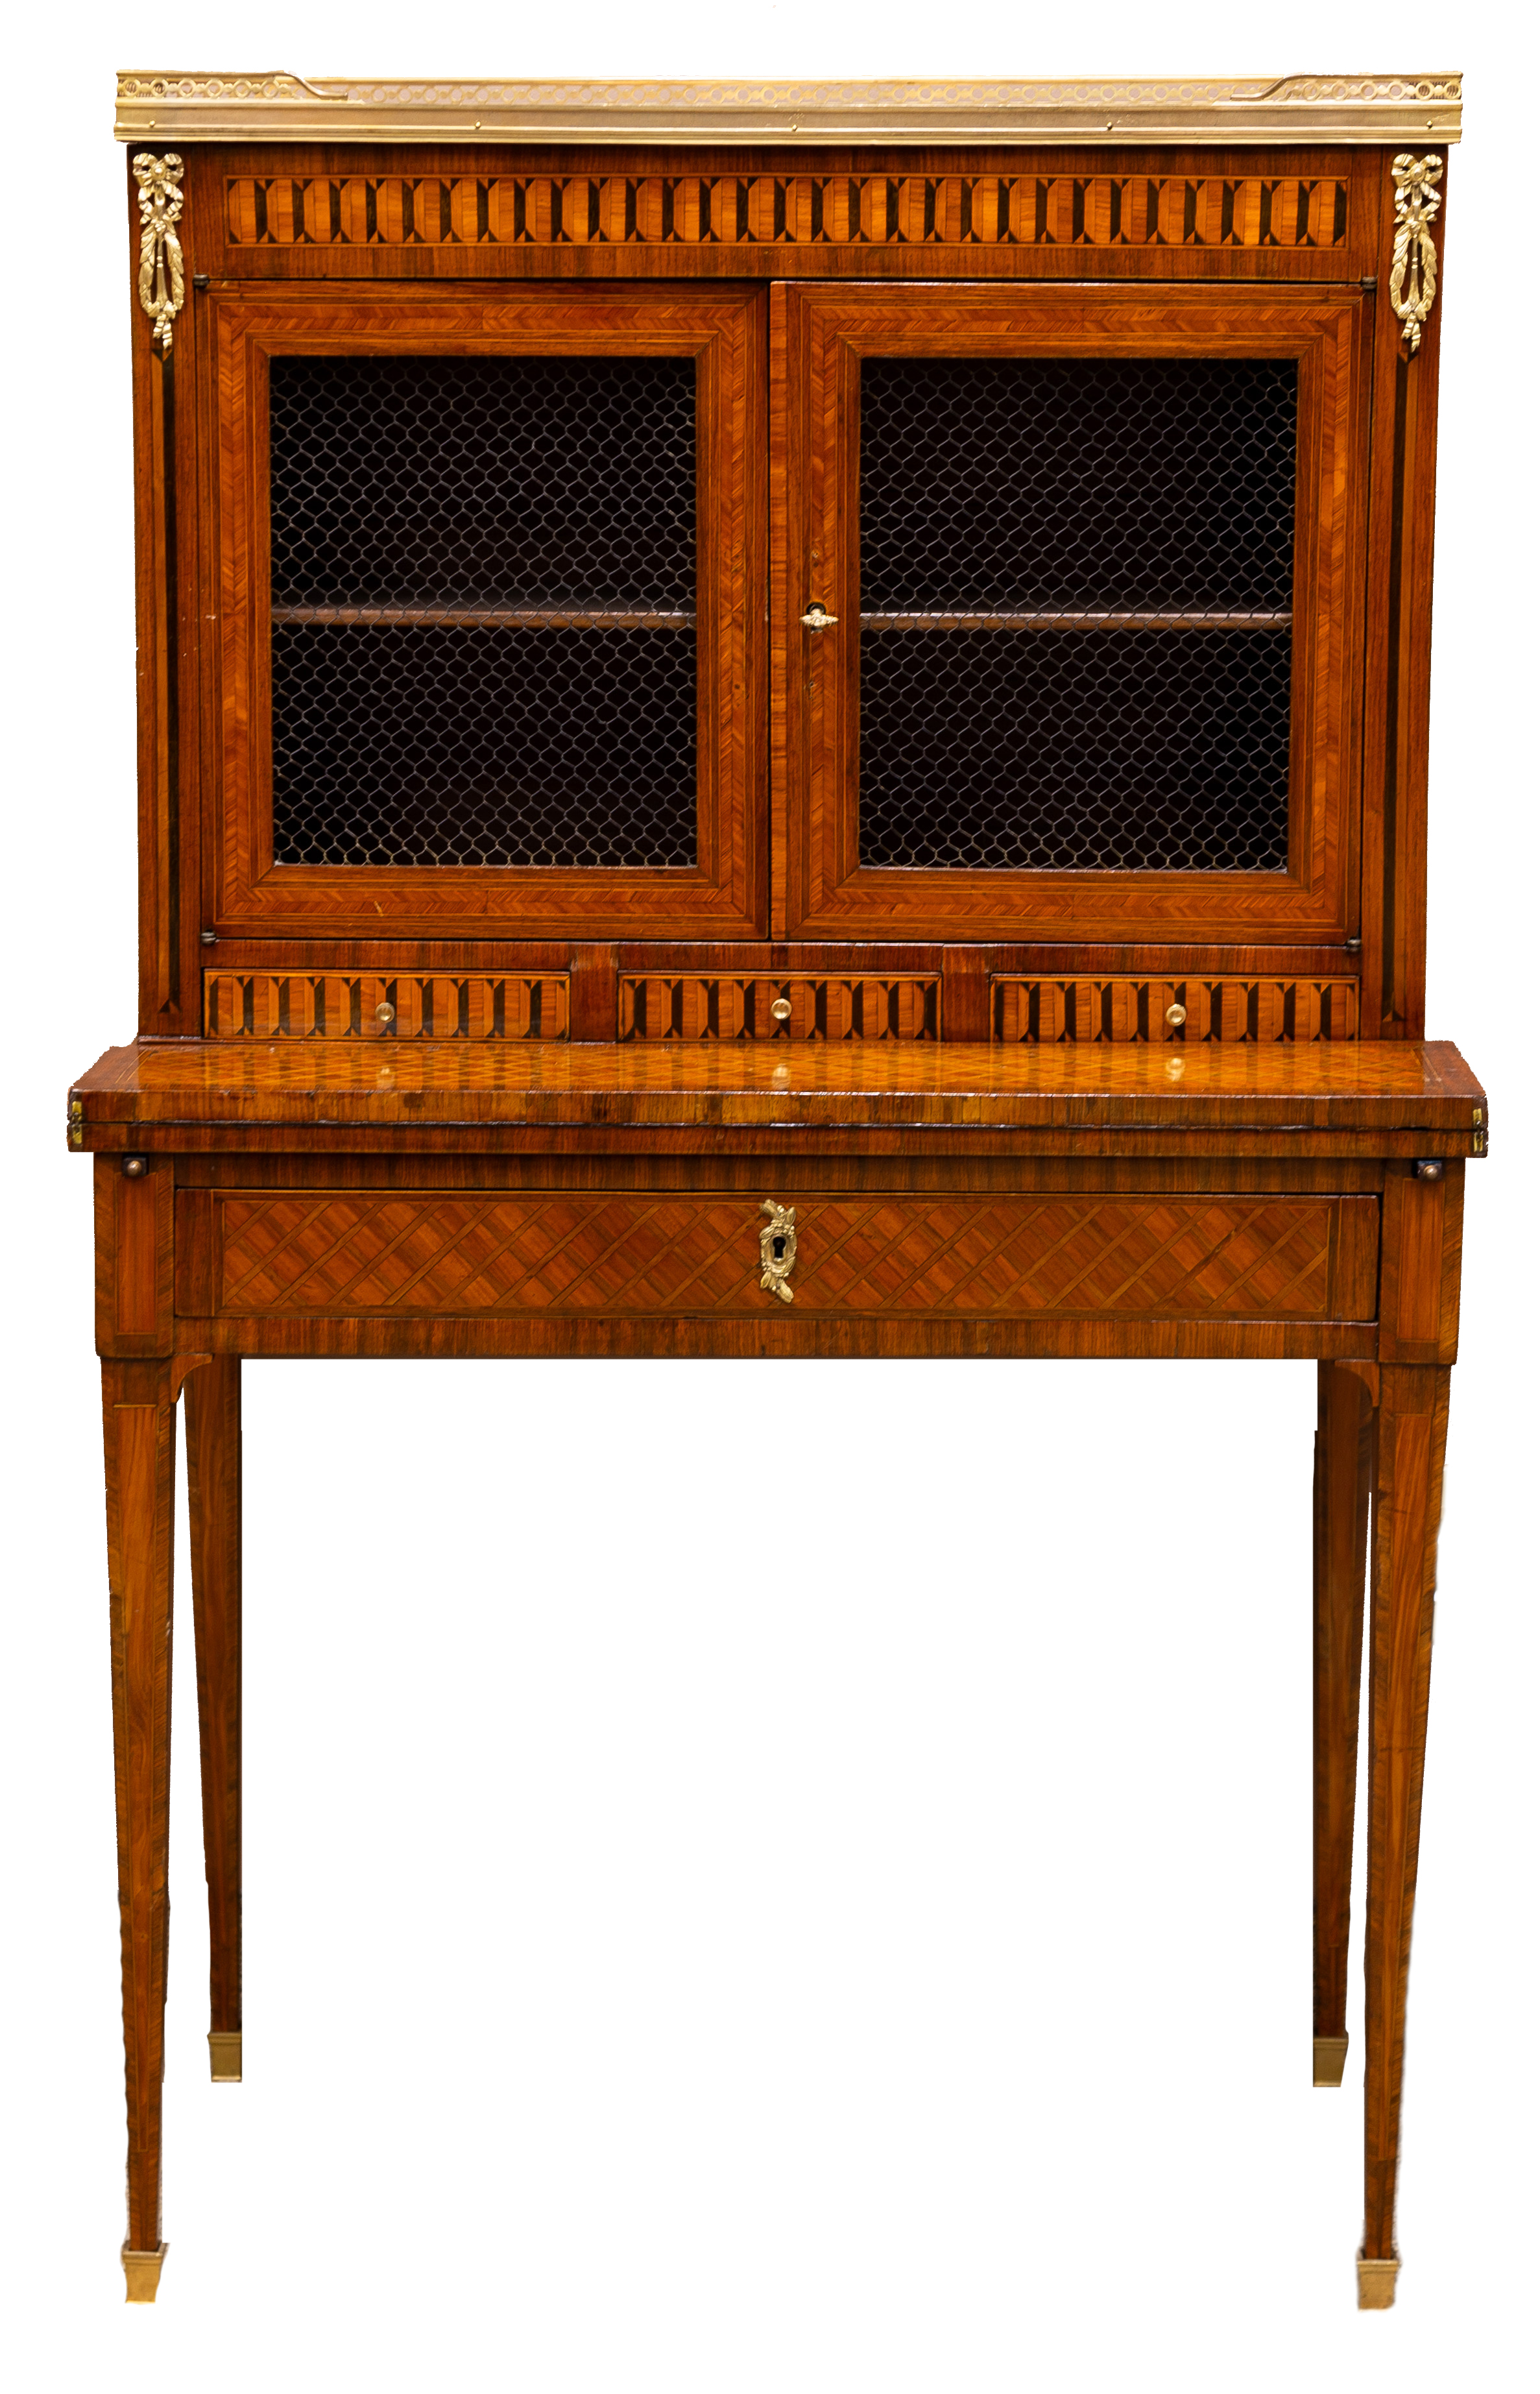 FRENCH KINGWOOD MARQUETRY DIRECTORIE